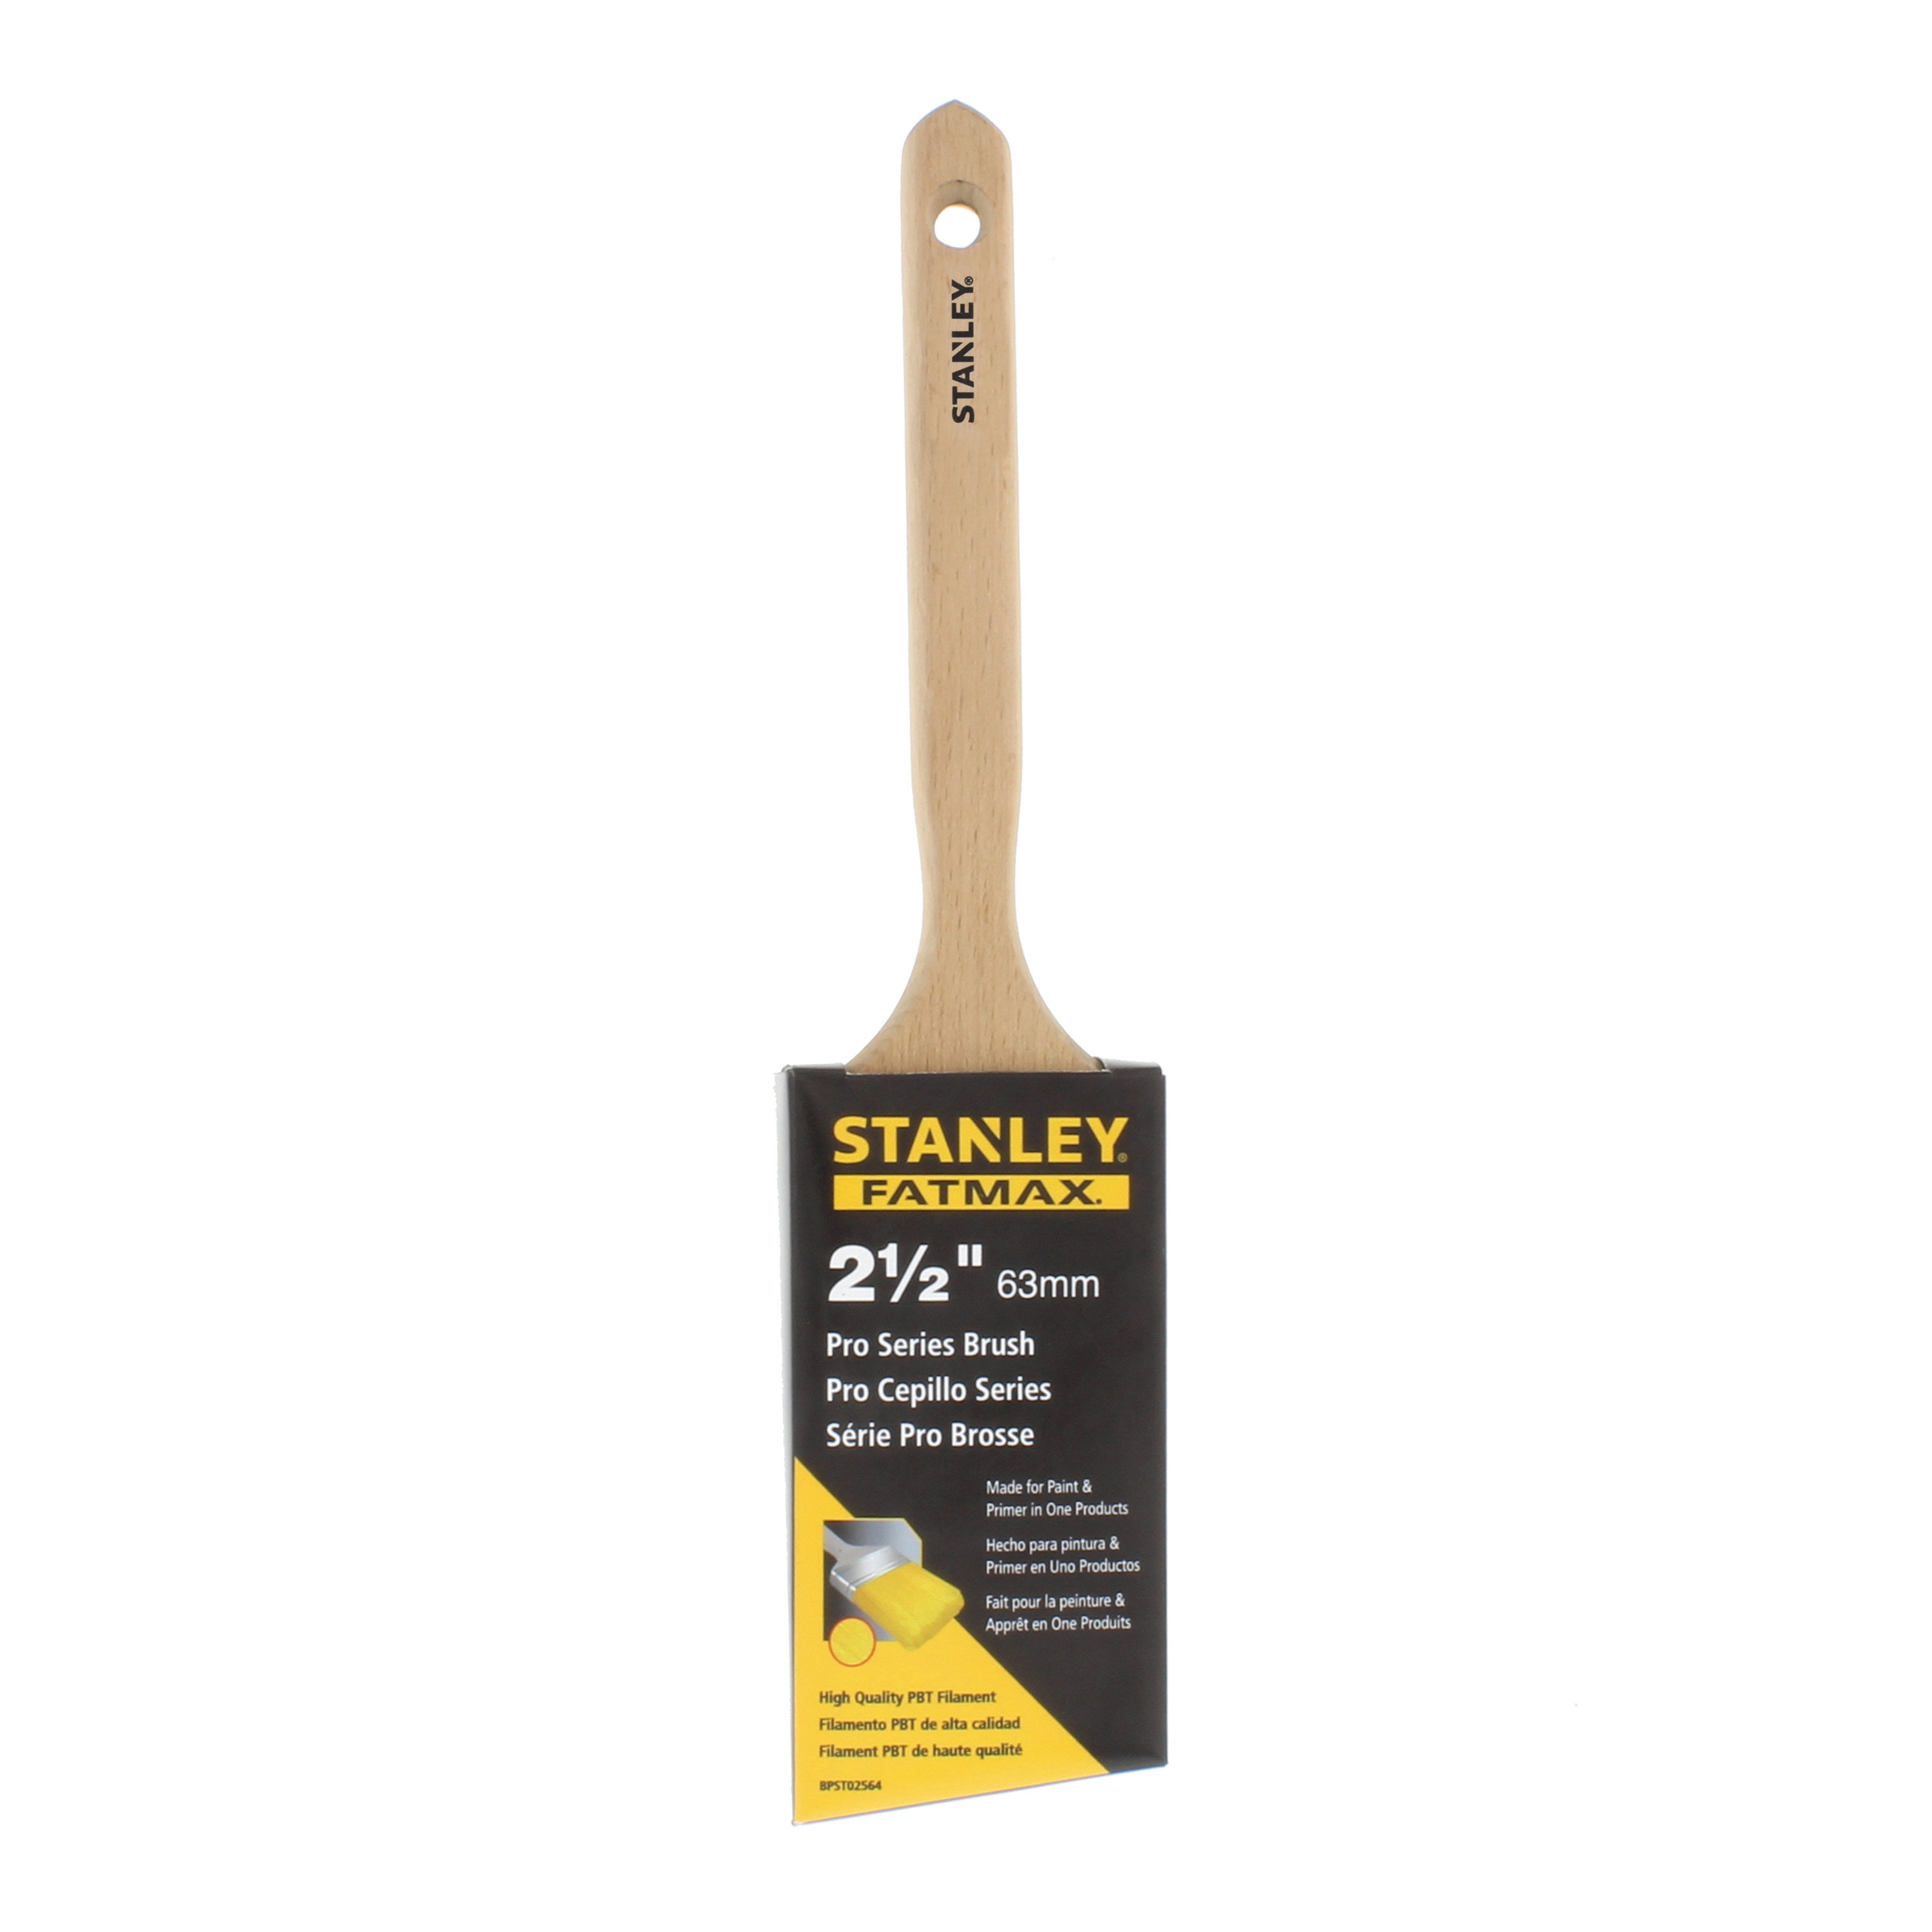 Stanley Tools - 212 in FATMAX PBT Long Angle Sash Paint Brush - BPST02564